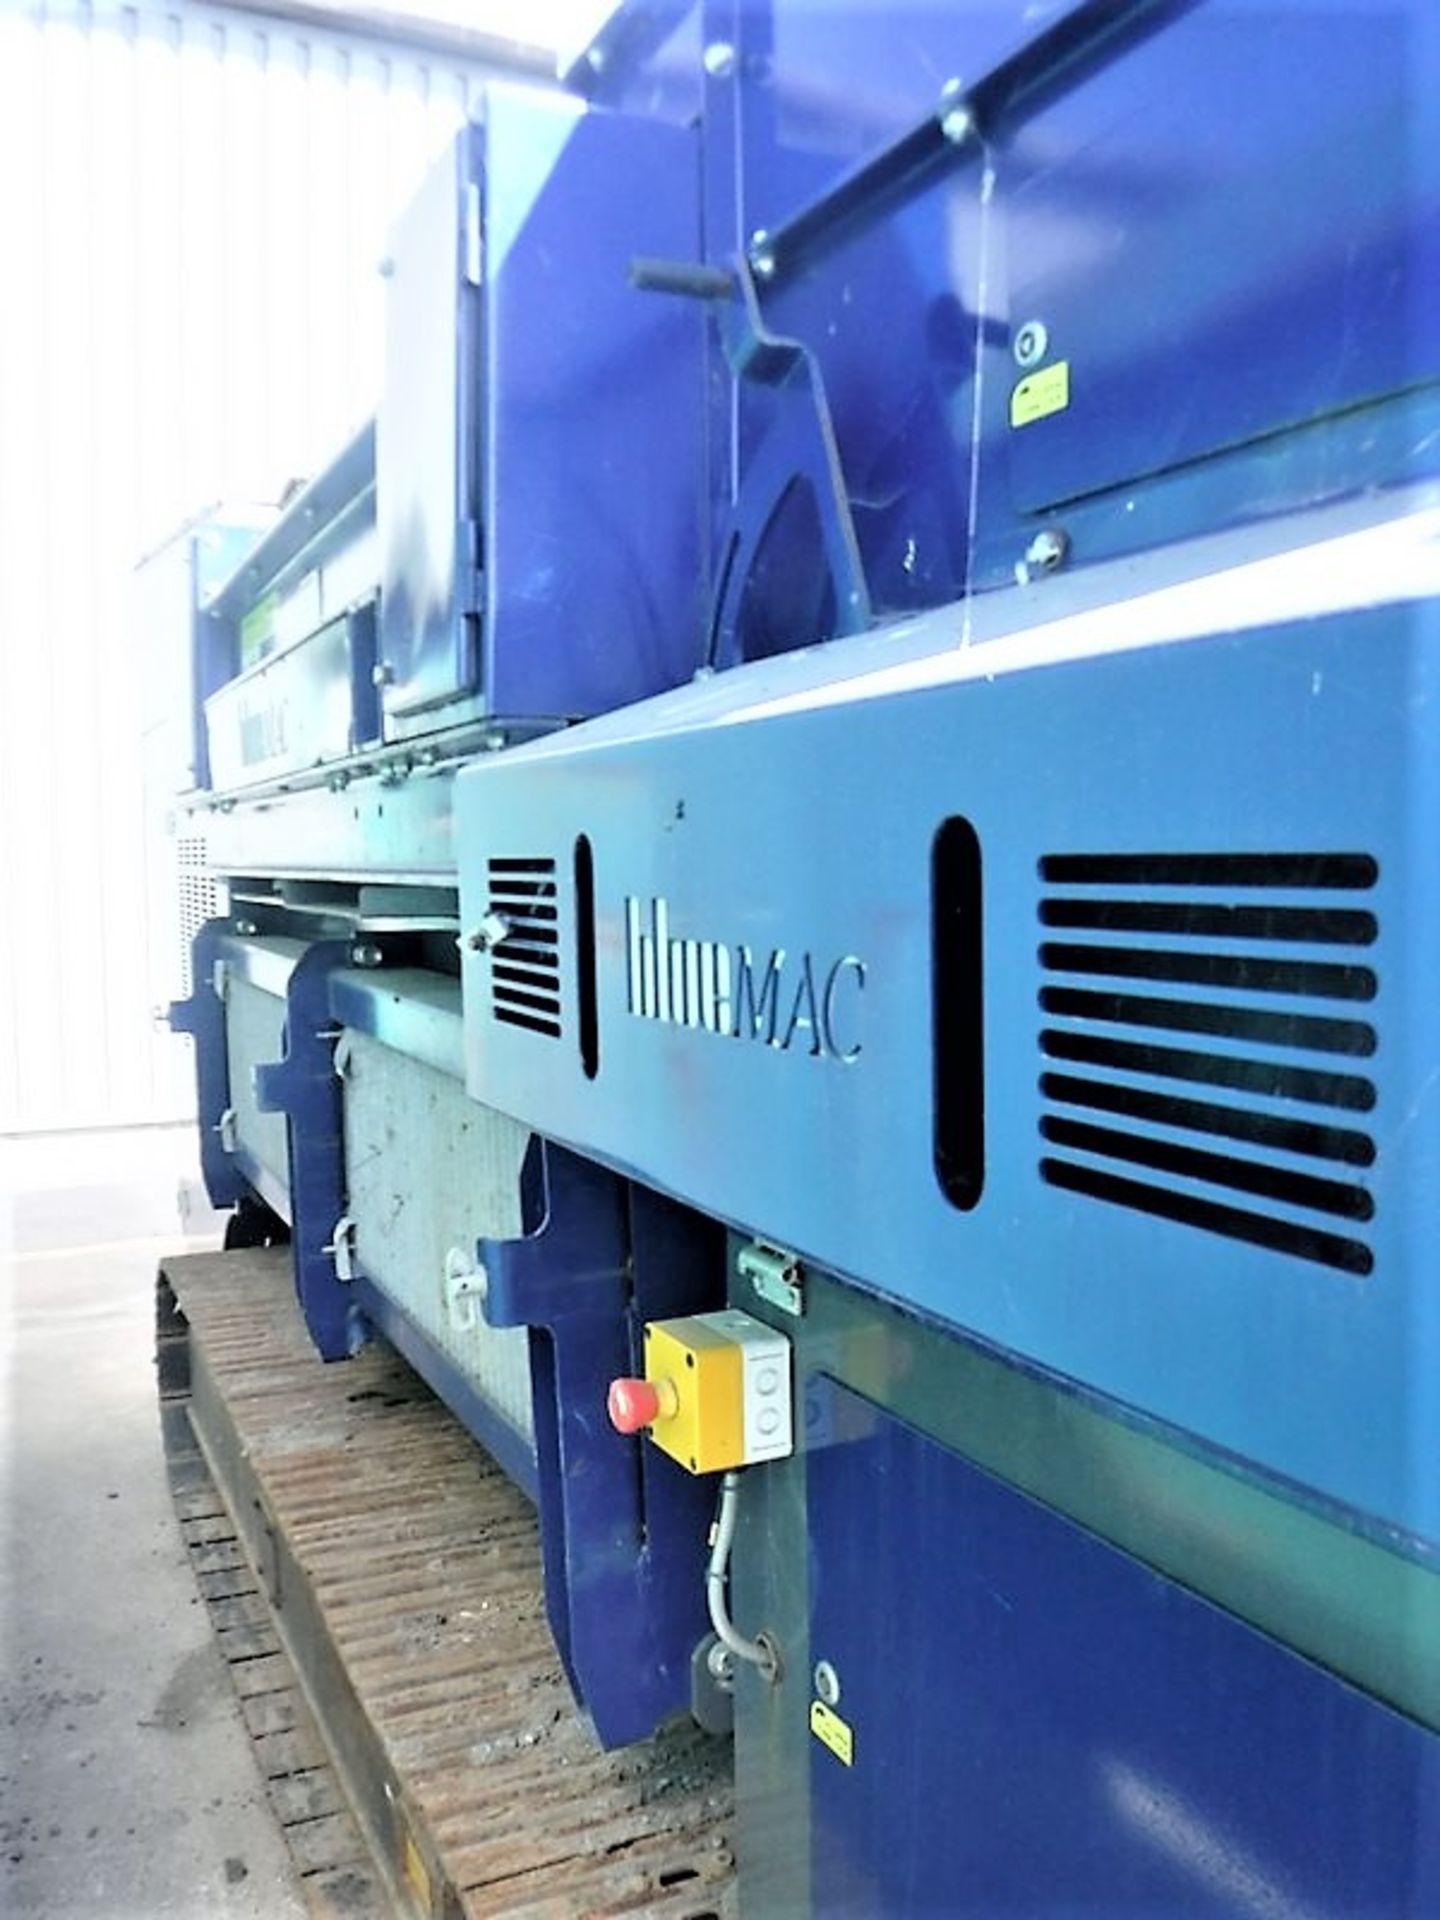 2014 BLUE MAC MANUFACTURING LTD Eddy Current Separator (ECS) s/n 6000-010 only used for woodchip wor - Image 27 of 27